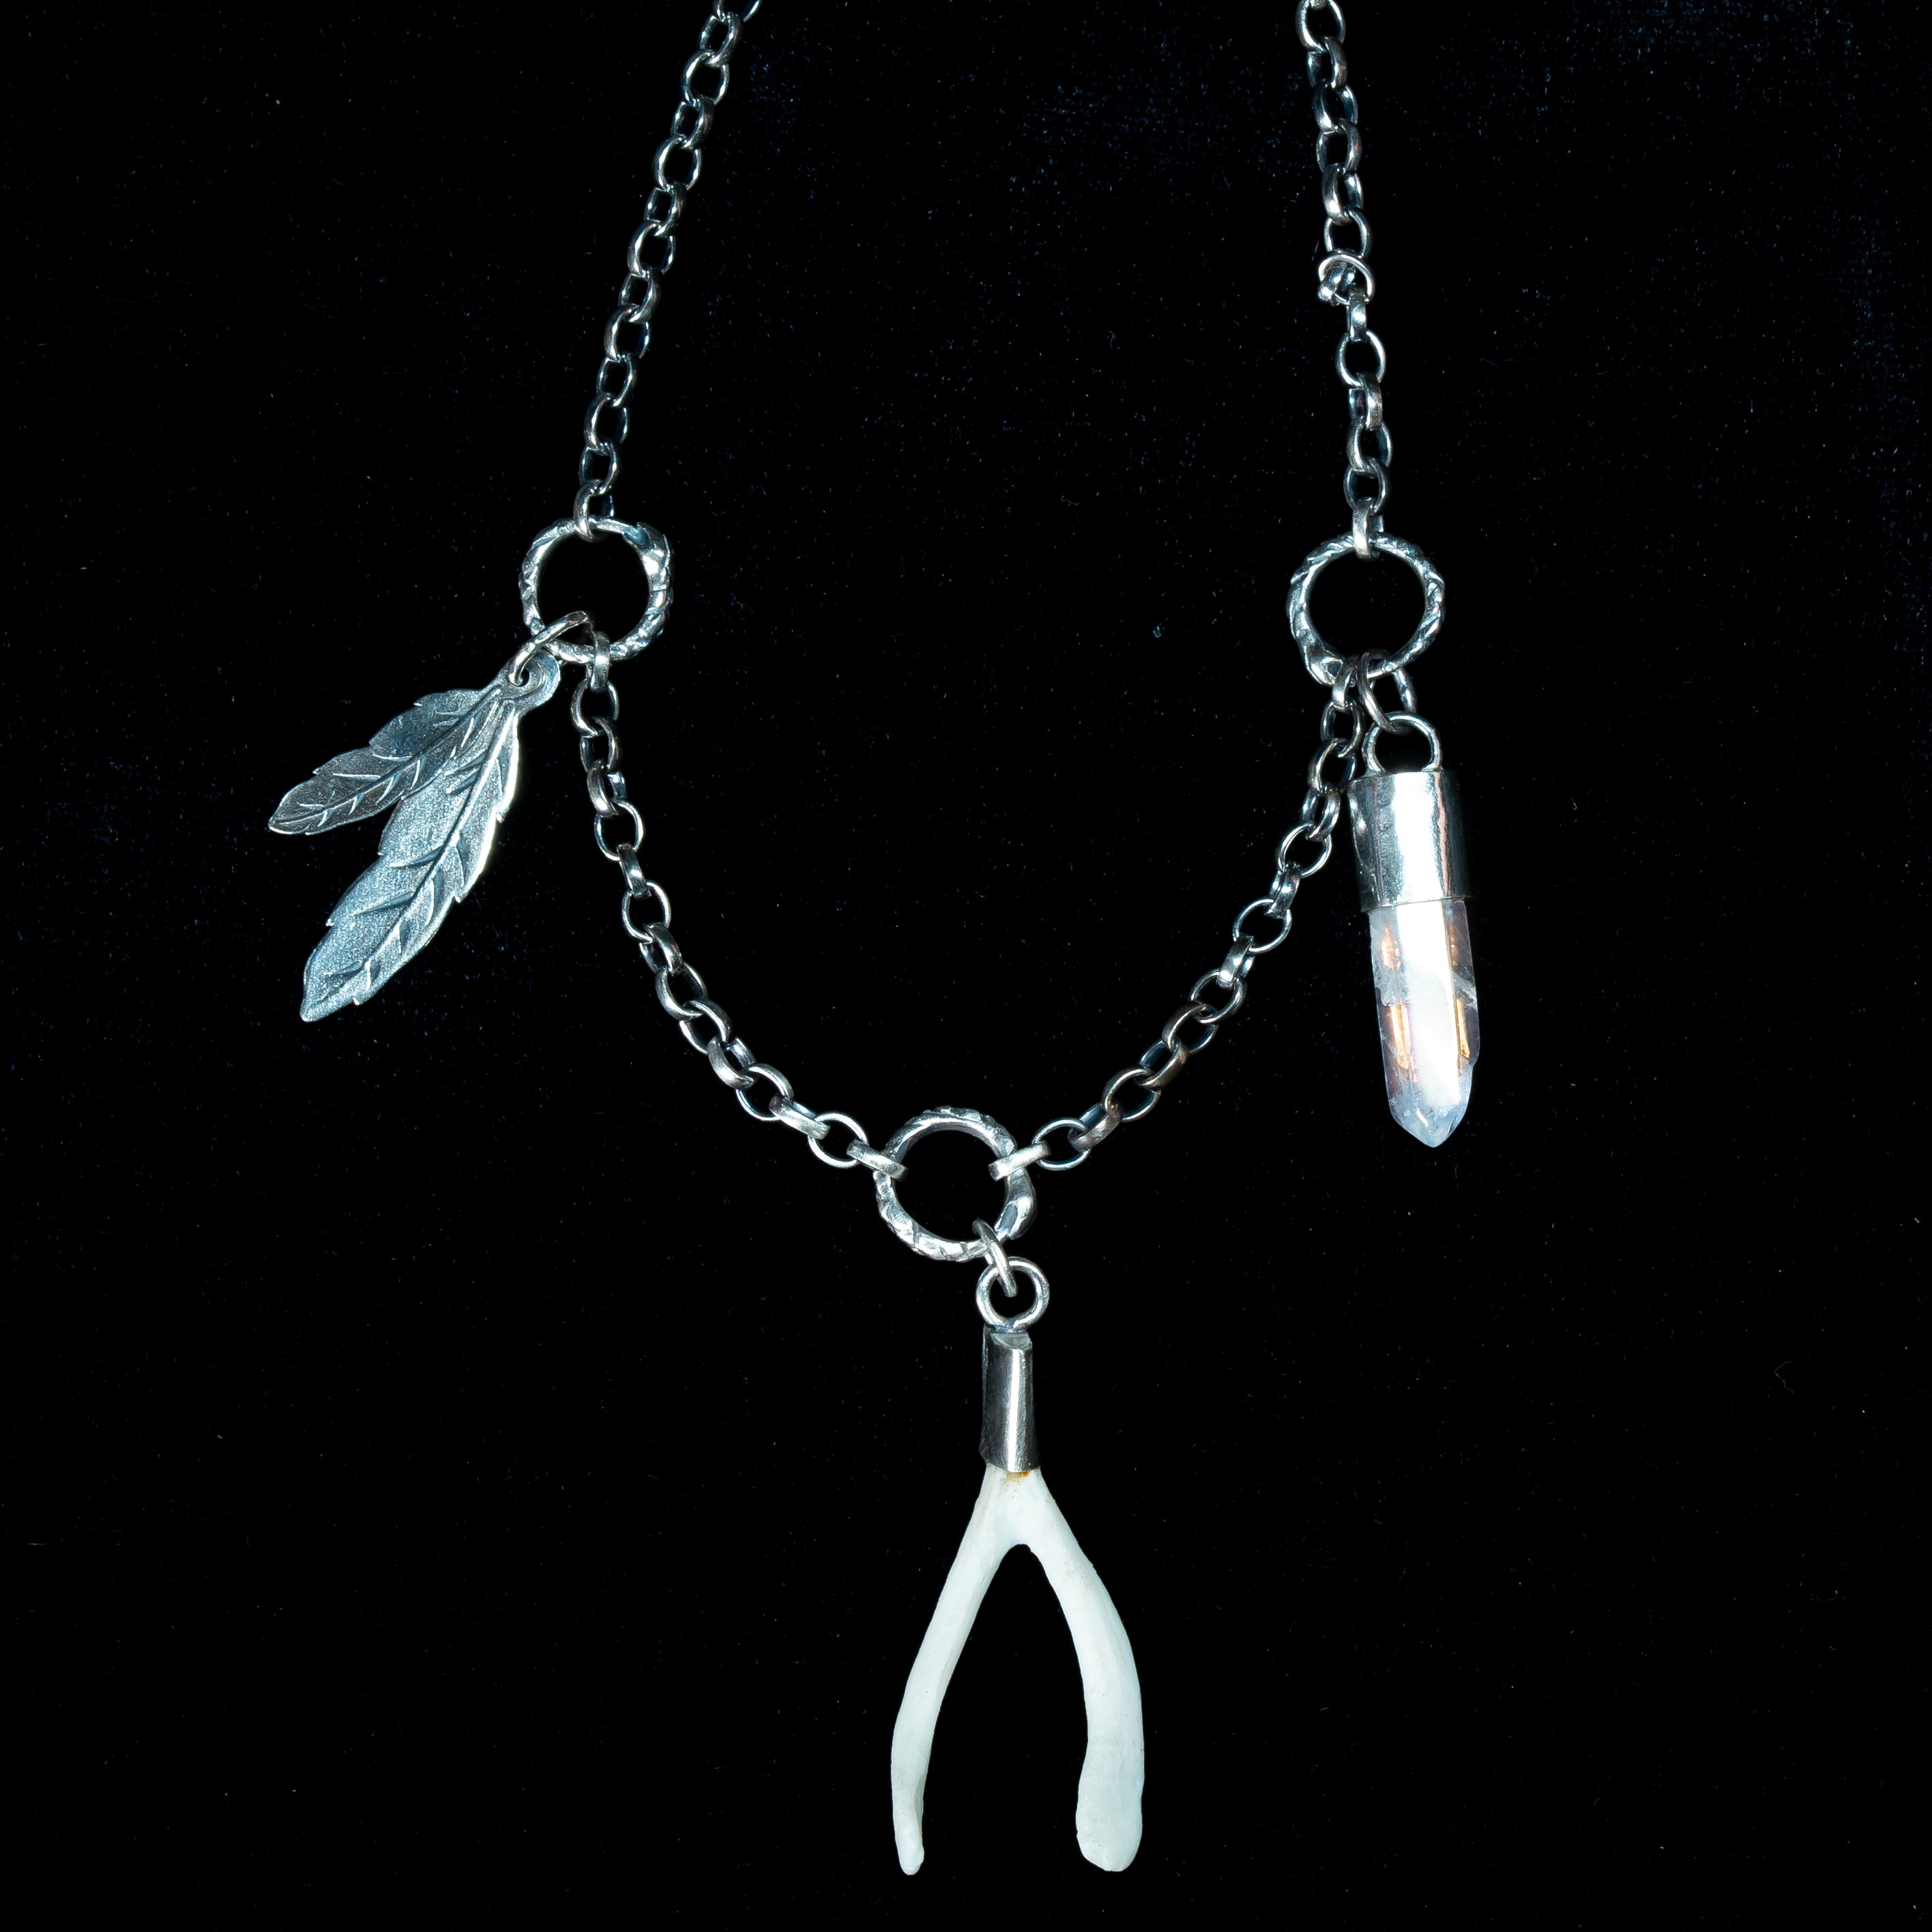 handmade one of a kind lucky charm chain  with clear quartz and silver feathers